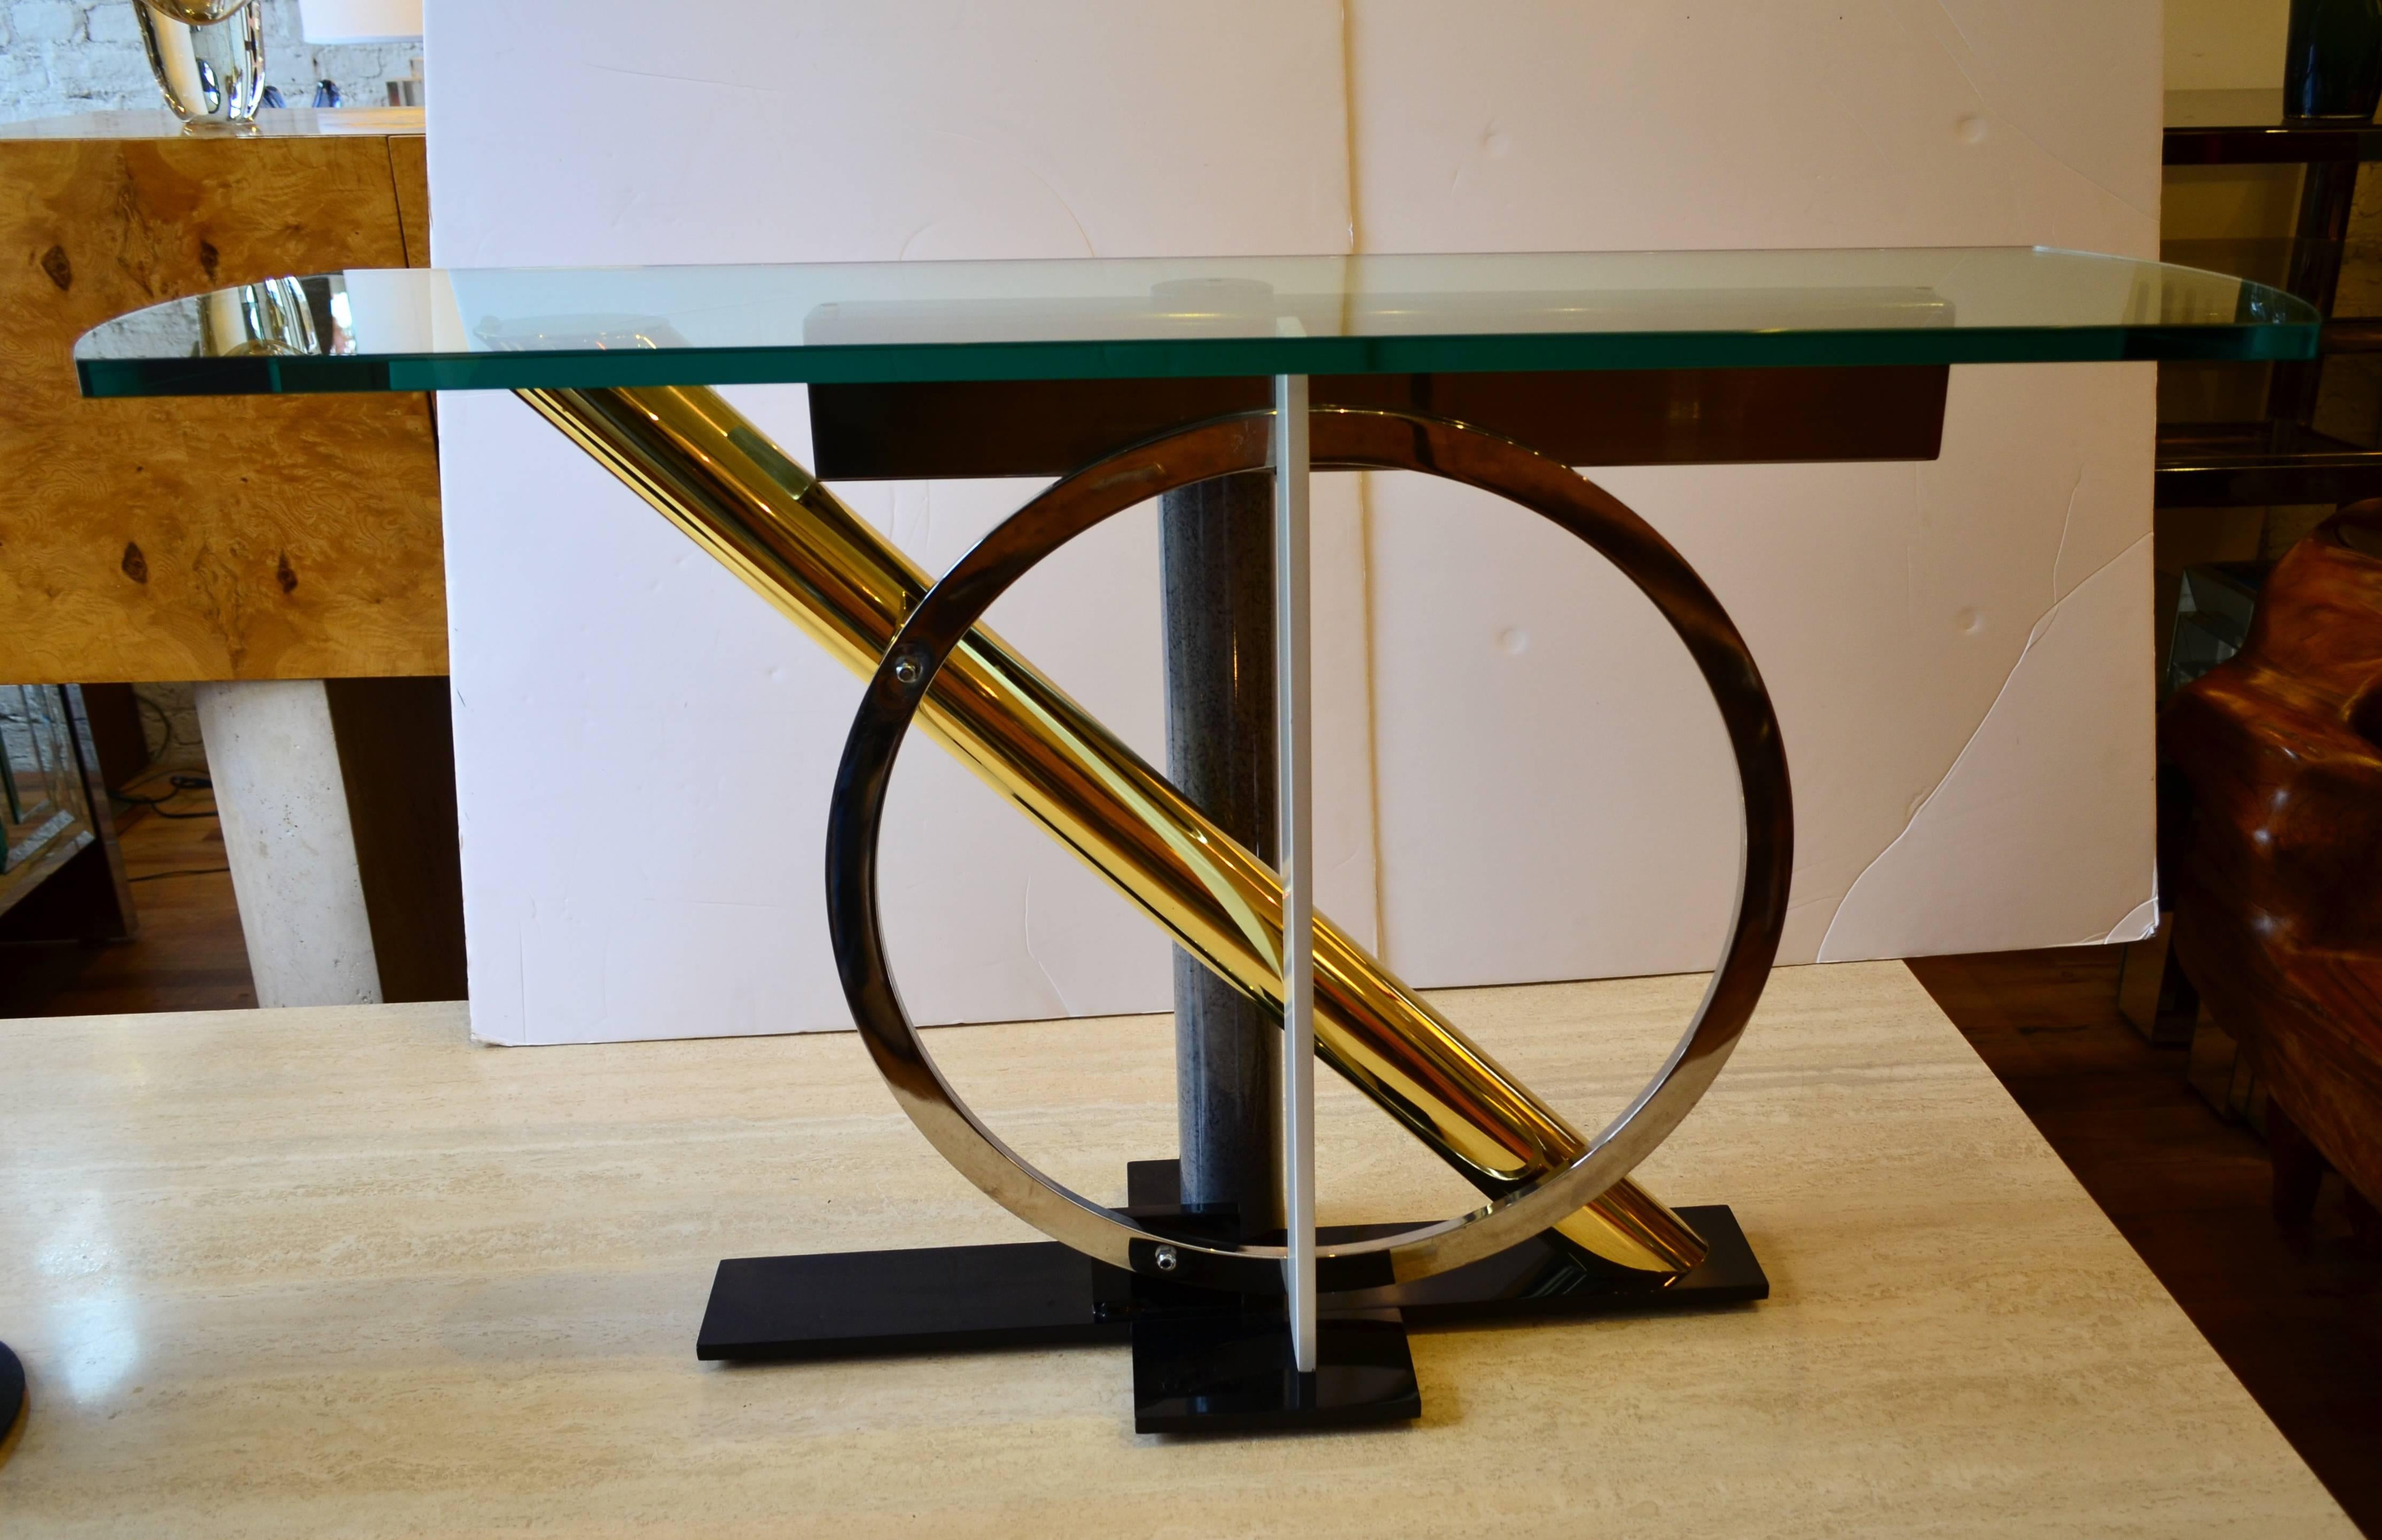 A Design Institute of America console table by
Kaizo Oto. This Memphis style geometric console
is a mixed-metal composition of brass, chrome and
enameled steel. Furniture as art. Excellent original condition.
The glass is very thick.